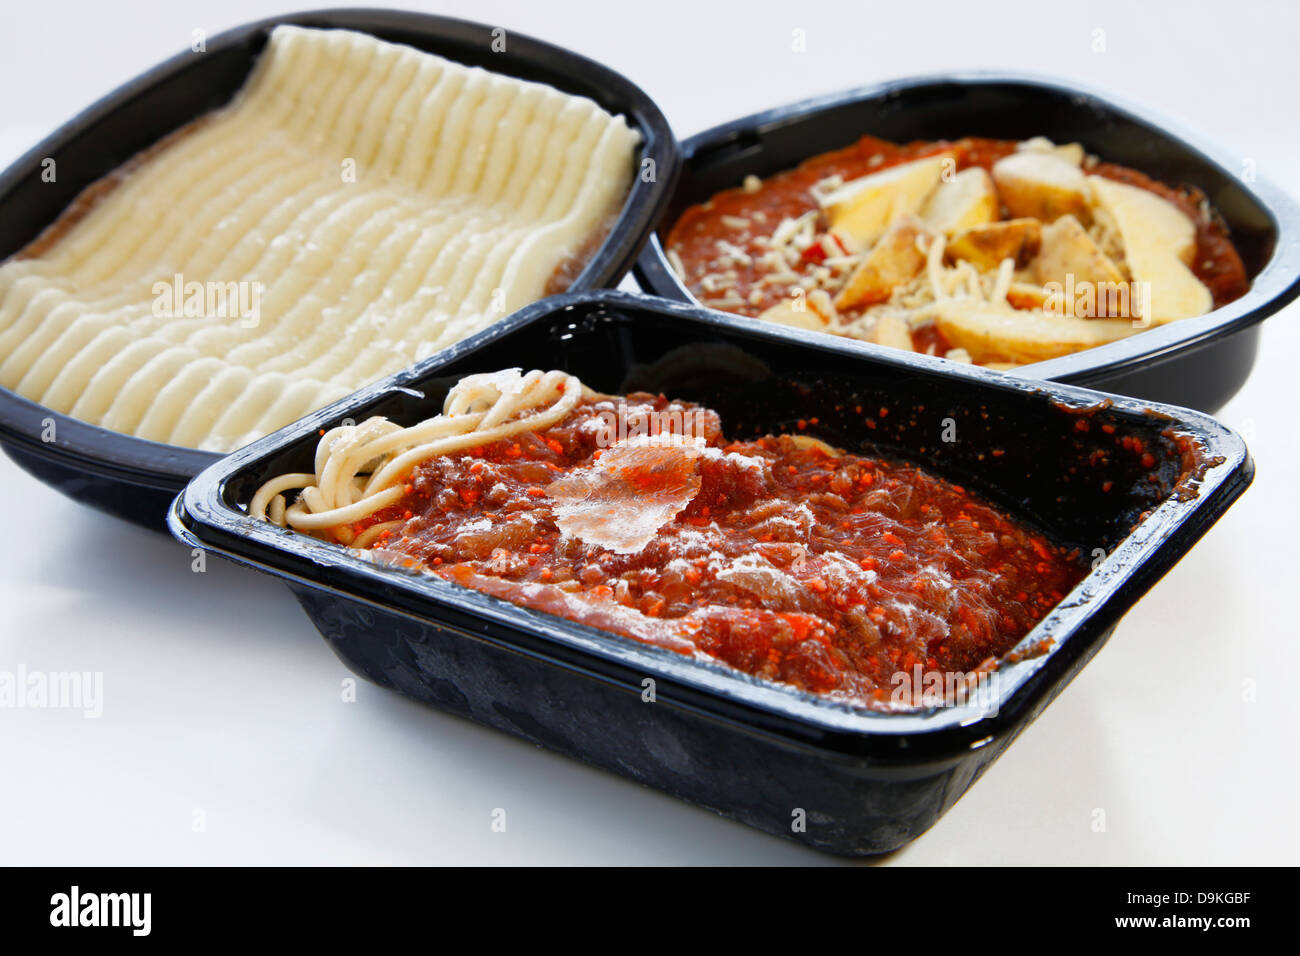 3 common TV dinners Chili chips Sheperds Pie and Spaghetti Bolognese Stock Photo